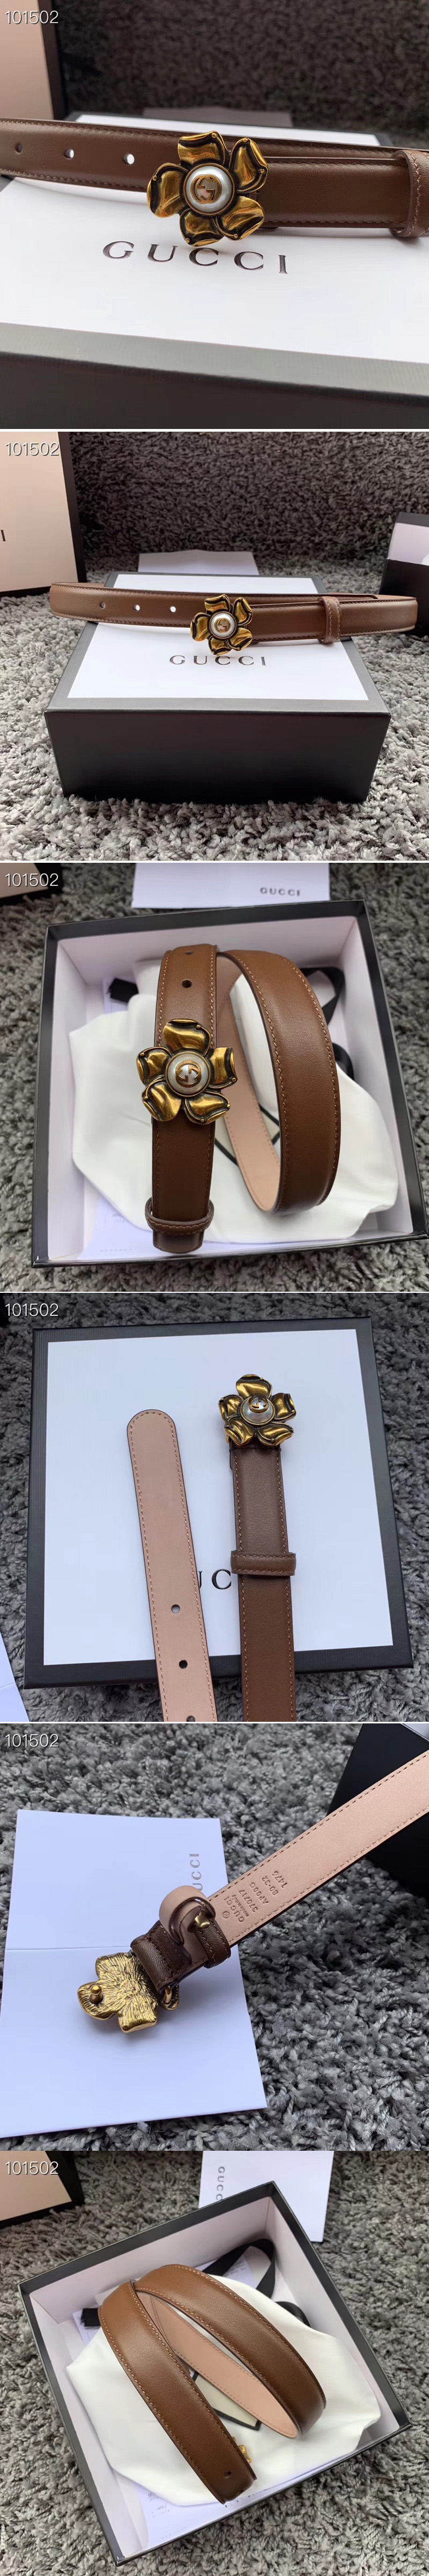 Replica Women's Gucci 370717 GG Marmont 25mm Leather belt with Flower Buckle in Caramel Leather